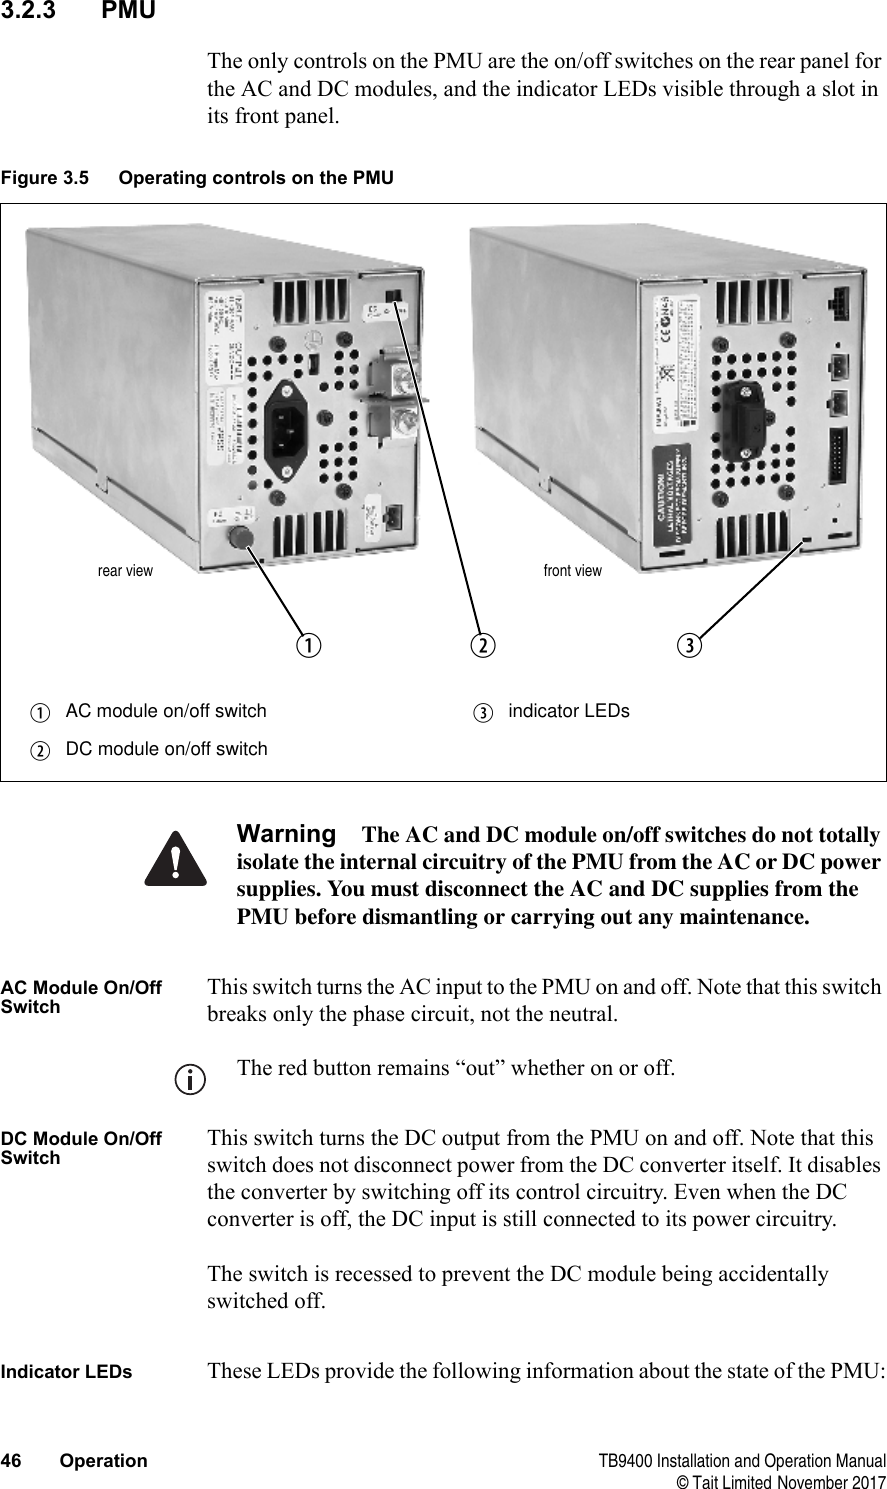  46 Operation TB9400 Installation and Operation Manual© Tait Limited November 20173.2.3 PMUThe only controls on the PMU are the on/off switches on the rear panel for the AC and DC modules, and the indicator LEDs visible through a slot in its front panel.Warning The AC and DC module on/off switches do not totally isolate the internal circuitry of the PMU from the AC or DC power supplies. You must disconnect the AC and DC supplies from the PMU before dismantling or carrying out any maintenance. AC Module On/Off SwitchThis switch turns the AC input to the PMU on and off. Note that this switch breaks only the phase circuit, not the neutral.The red button remains “out” whether on or off.DC Module On/Off SwitchThis switch turns the DC output from the PMU on and off. Note that this switch does not disconnect power from the DC converter itself. It disables the converter by switching off its control circuitry. Even when the DC converter is off, the DC input is still connected to its power circuitry. The switch is recessed to prevent the DC module being accidentally switched off. Indicator LEDs These LEDs provide the following information about the state of the PMU:Figure 3.5 Operating controls on the PMUbAC module on/off switch dindicator LEDscDC module on/off switchbcrear viewdfront view